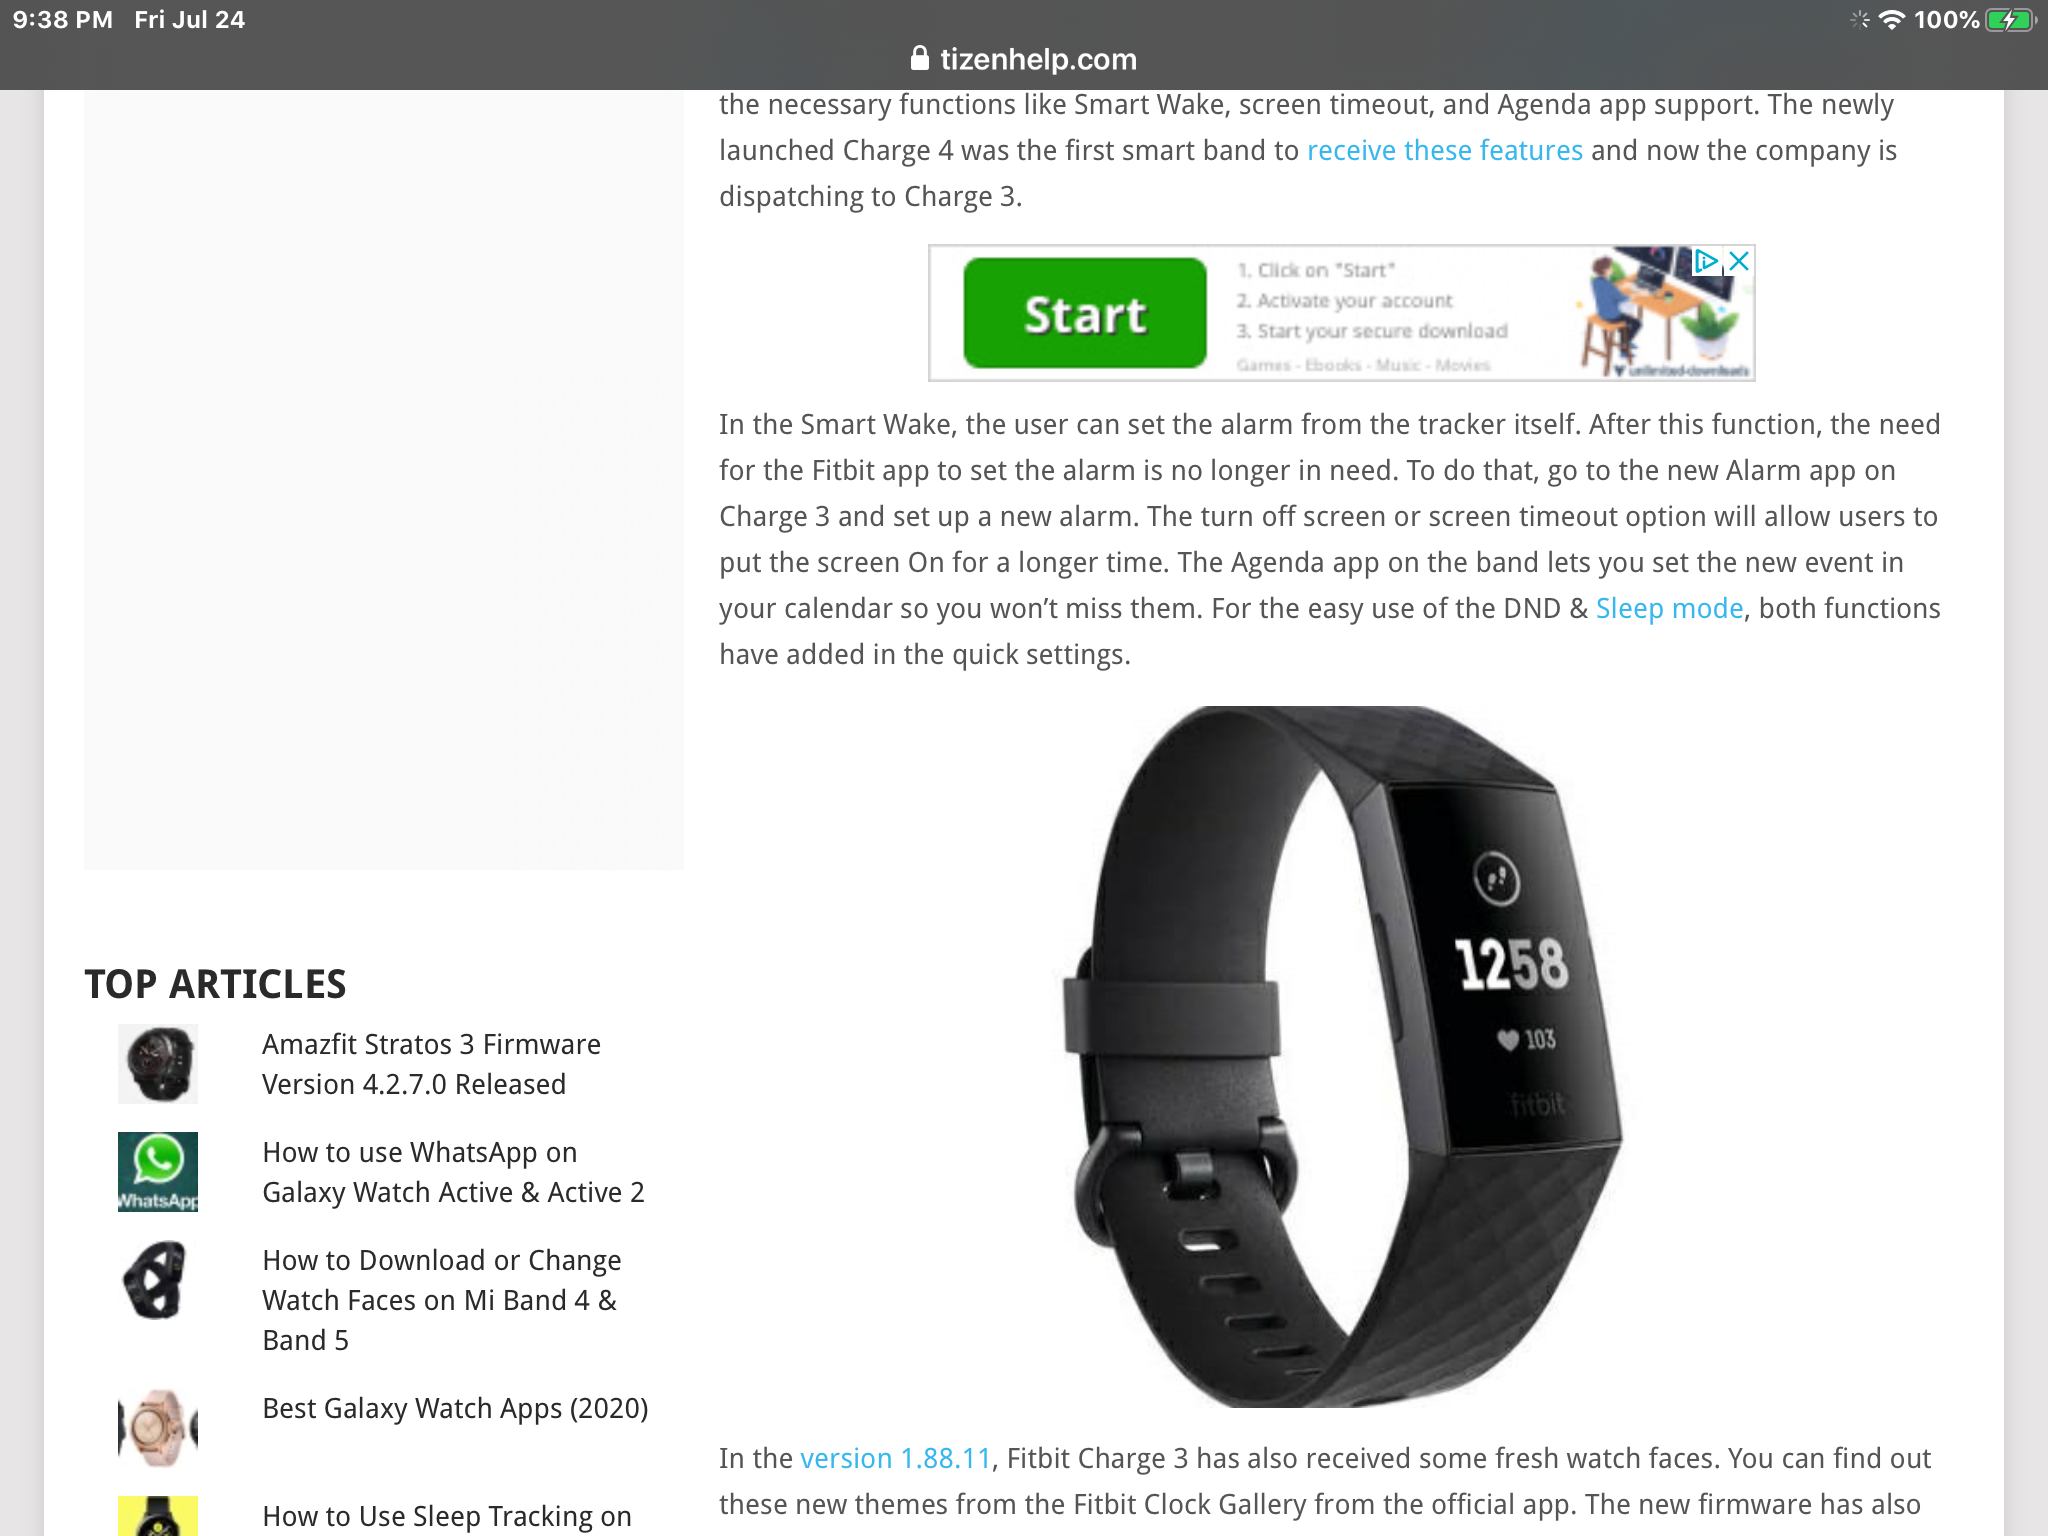 fitbit charge 2 latest firmware version